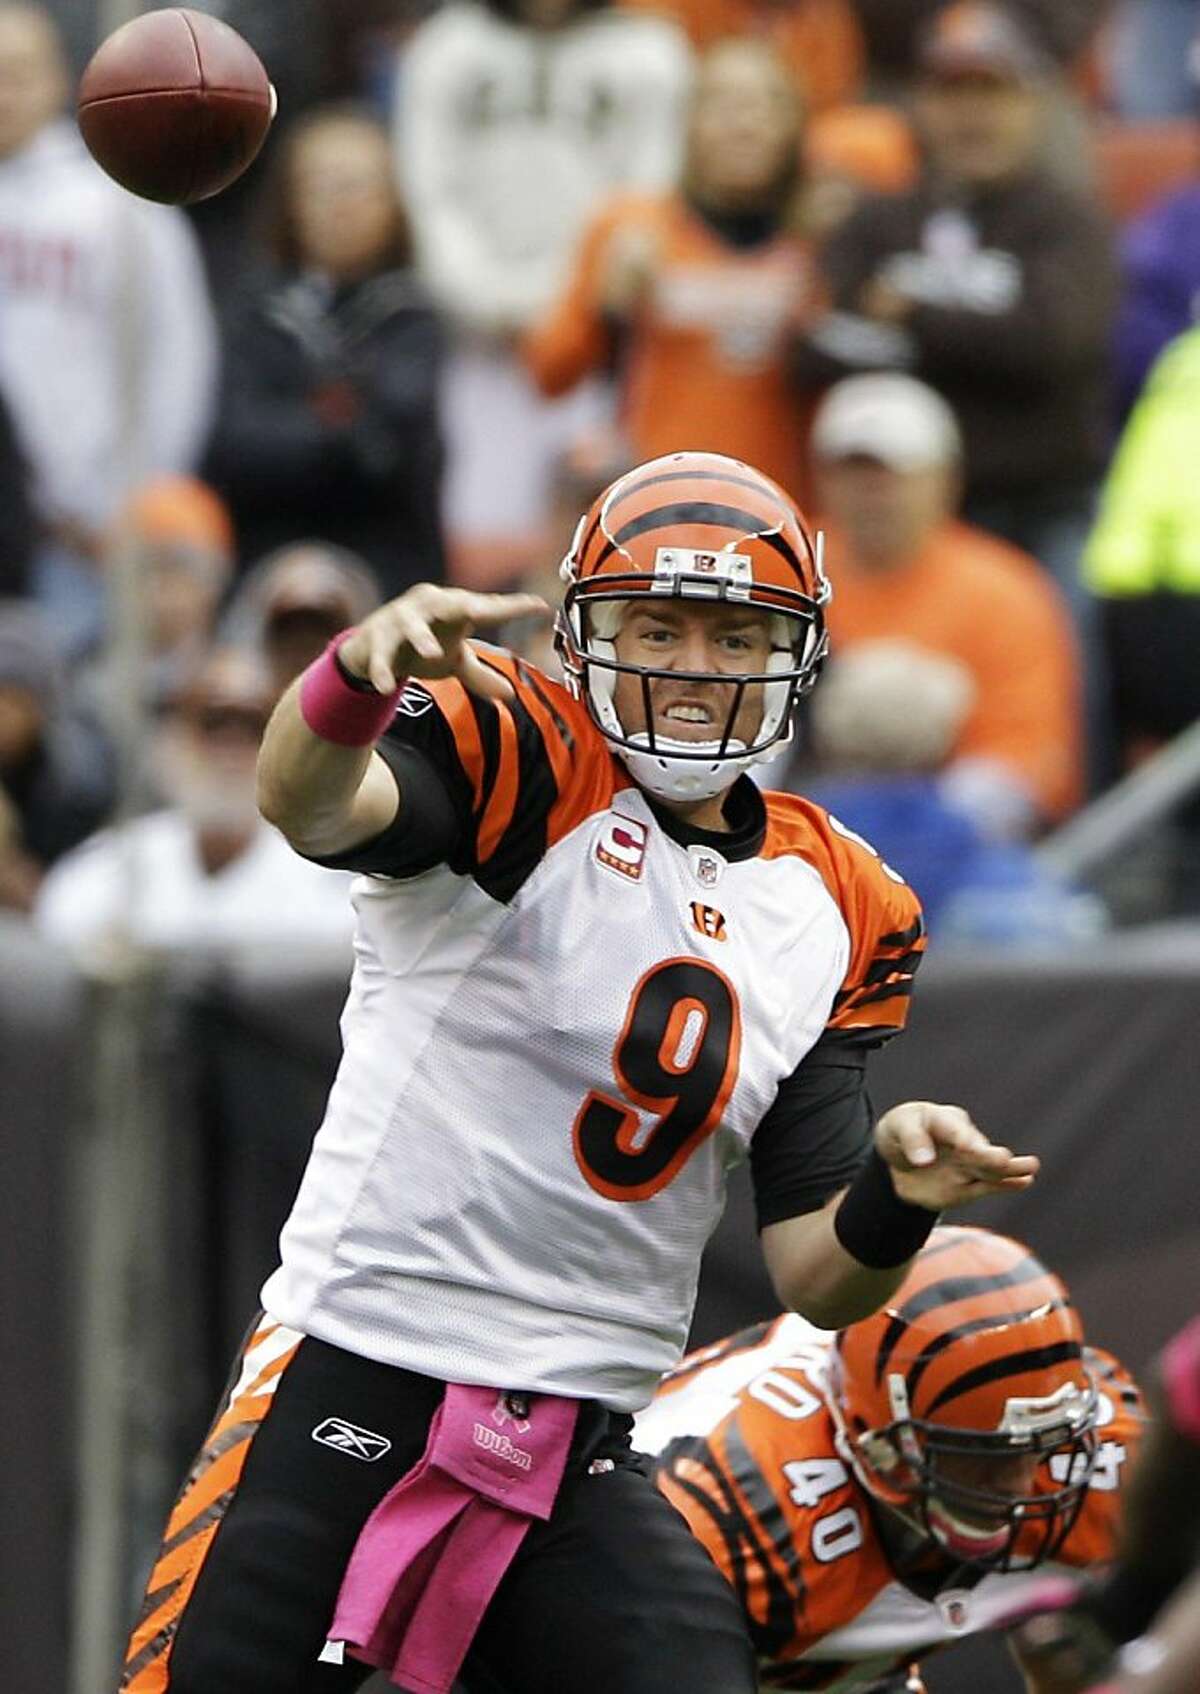 Cincinnati Bengals quarterback Carson Palmer passes against the Cleveland Browns in the first quarter of an NFL football game on Sunday, Oct. 3, 2010, in Cleveland. (AP Photo/Amy Sancetta) Ran on: 10-04-2010 Carson Palmer